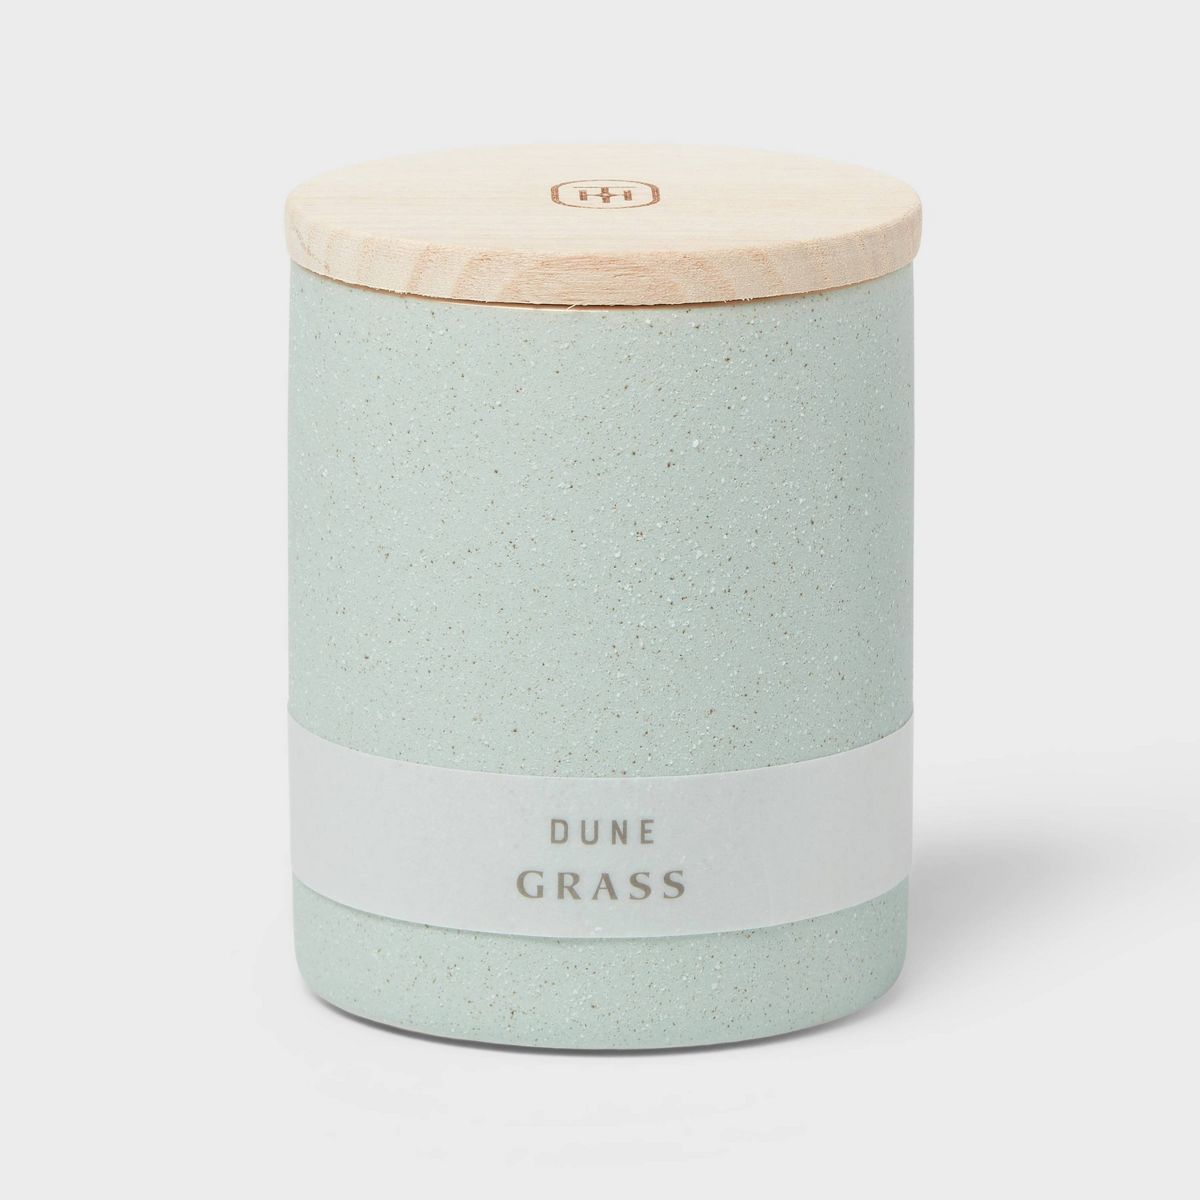 Matte Textured 6.4oz Ceramic Candle with Wooden Wick Dune Grass - Threshold™ | Target